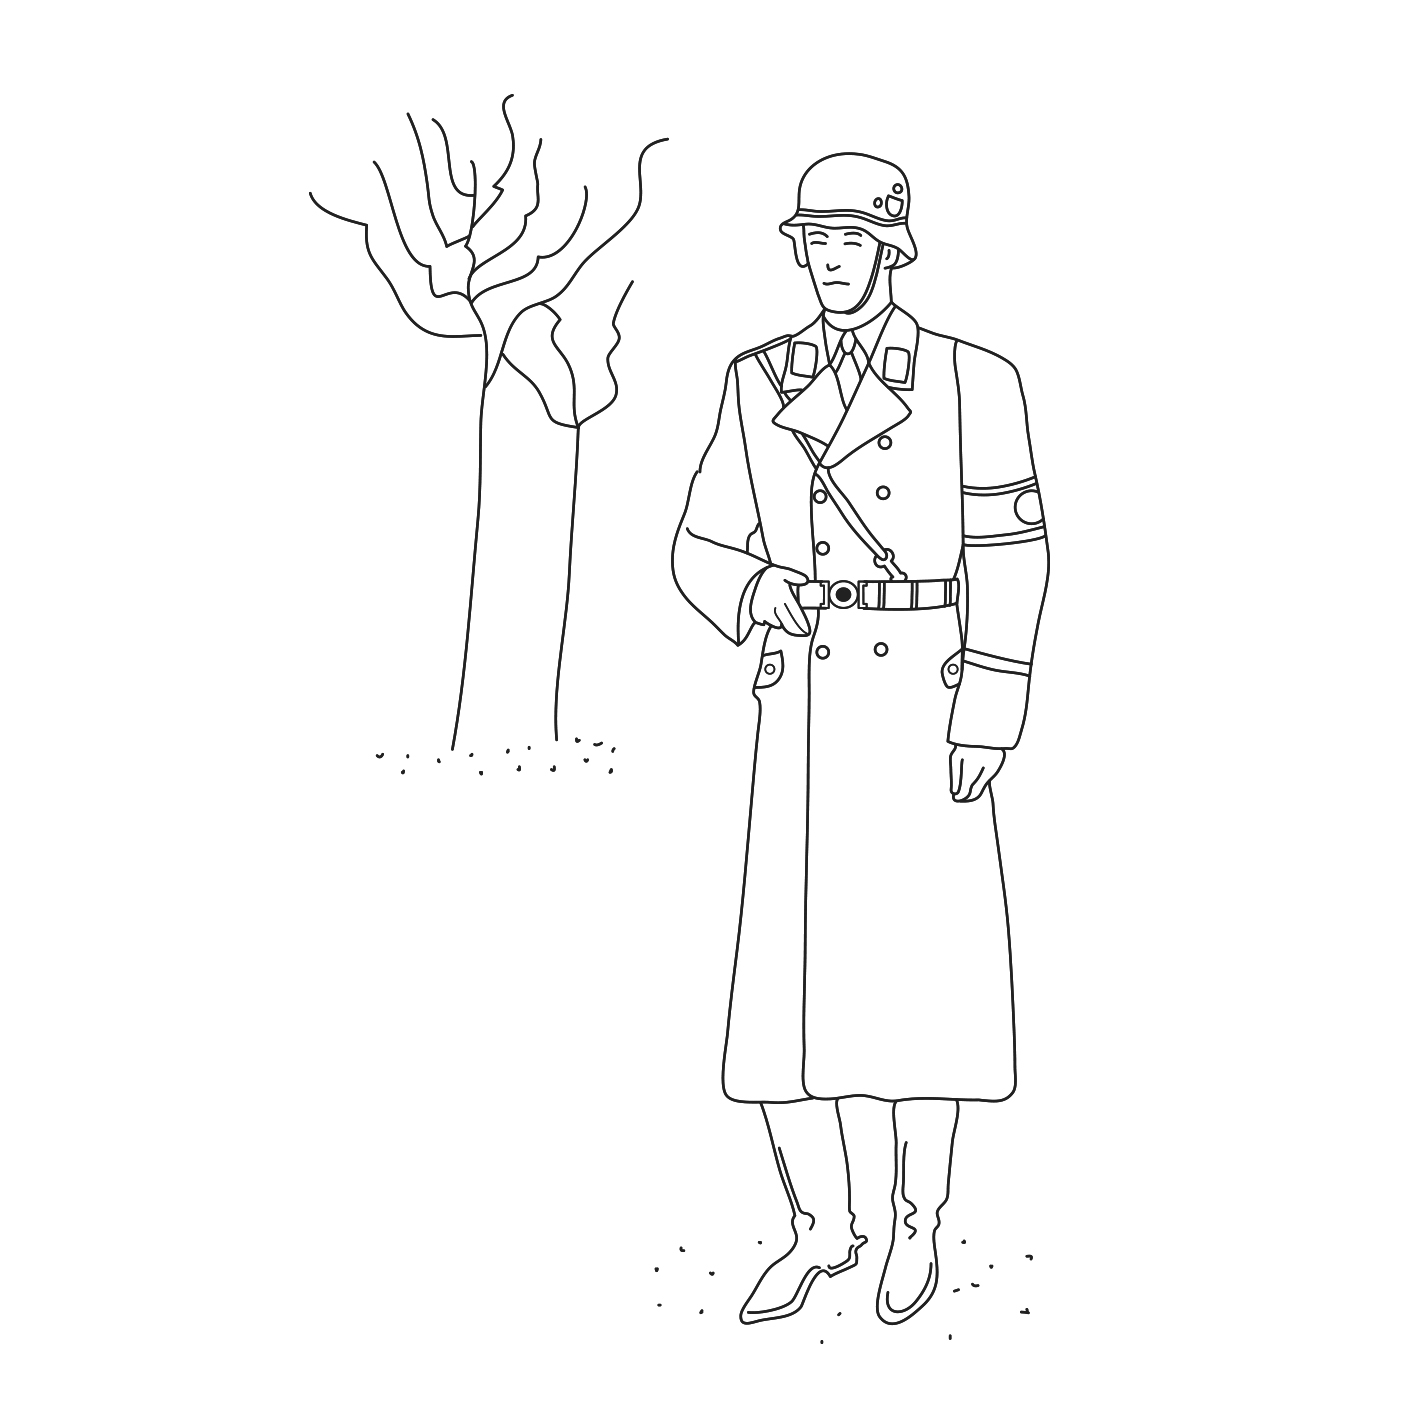 German SS Soldier and tree